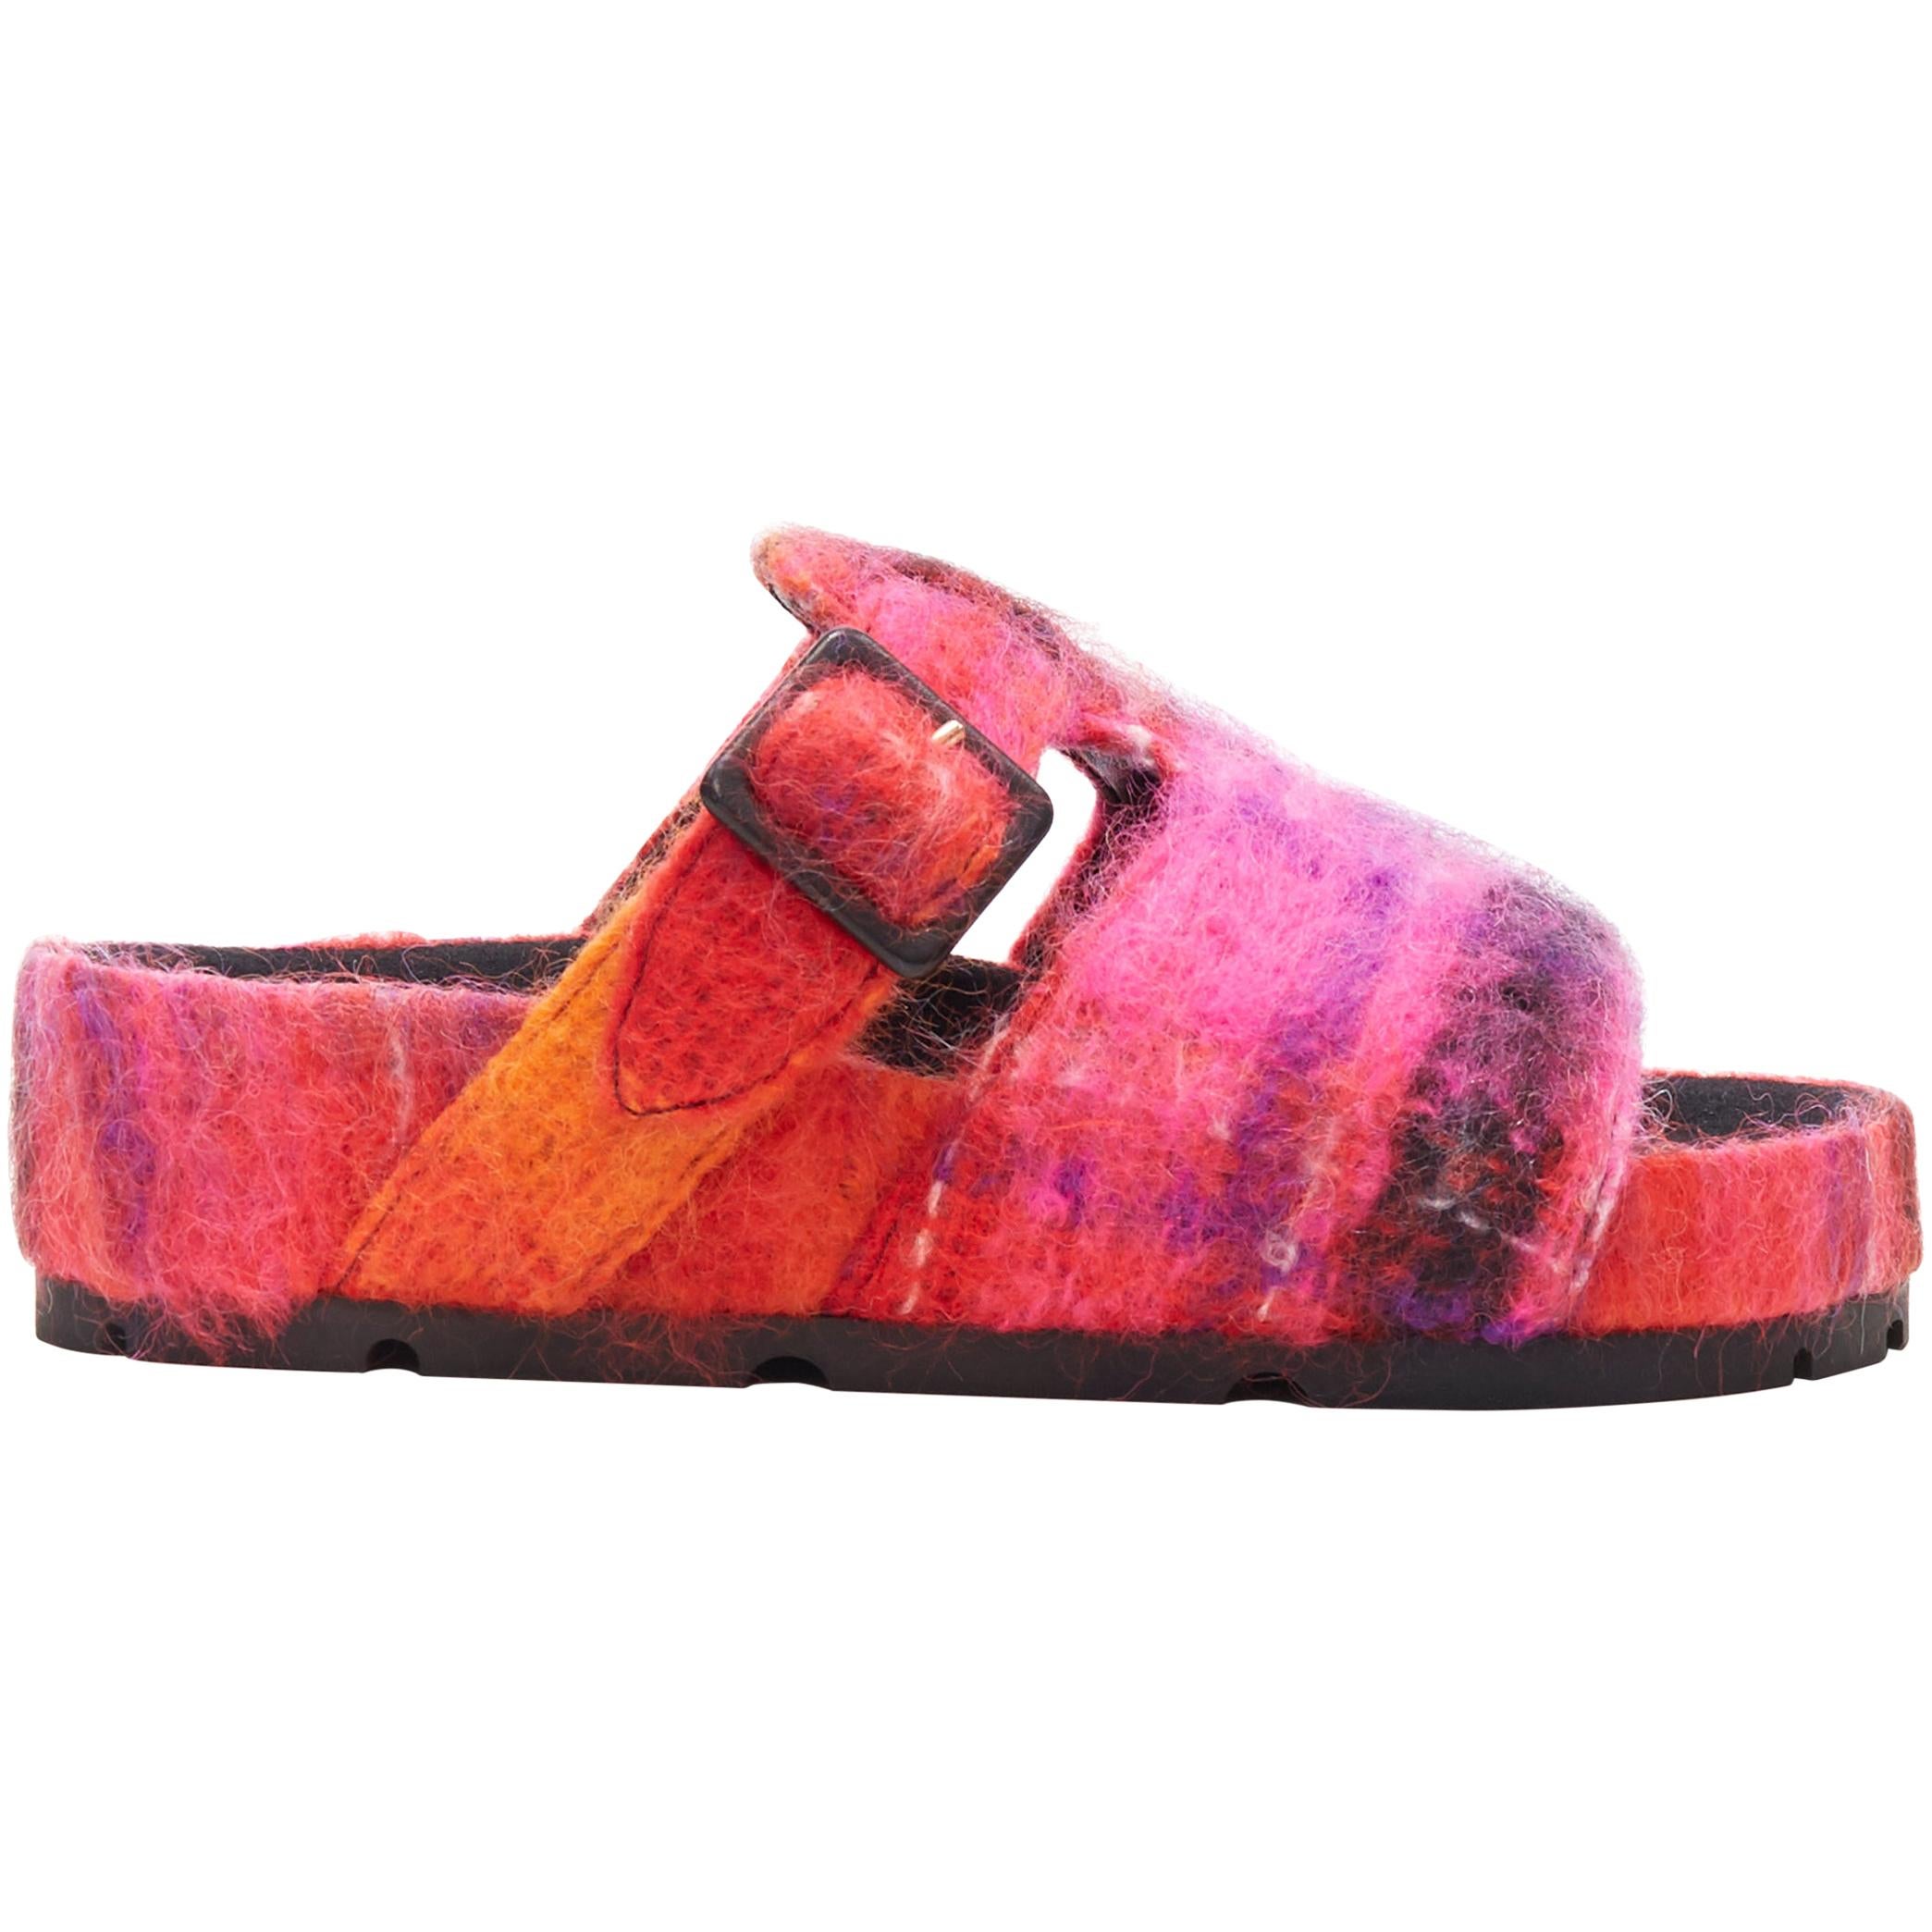 new OLD CELINE Boxy Mohair pink red check print buckle flat sandal slides EU40